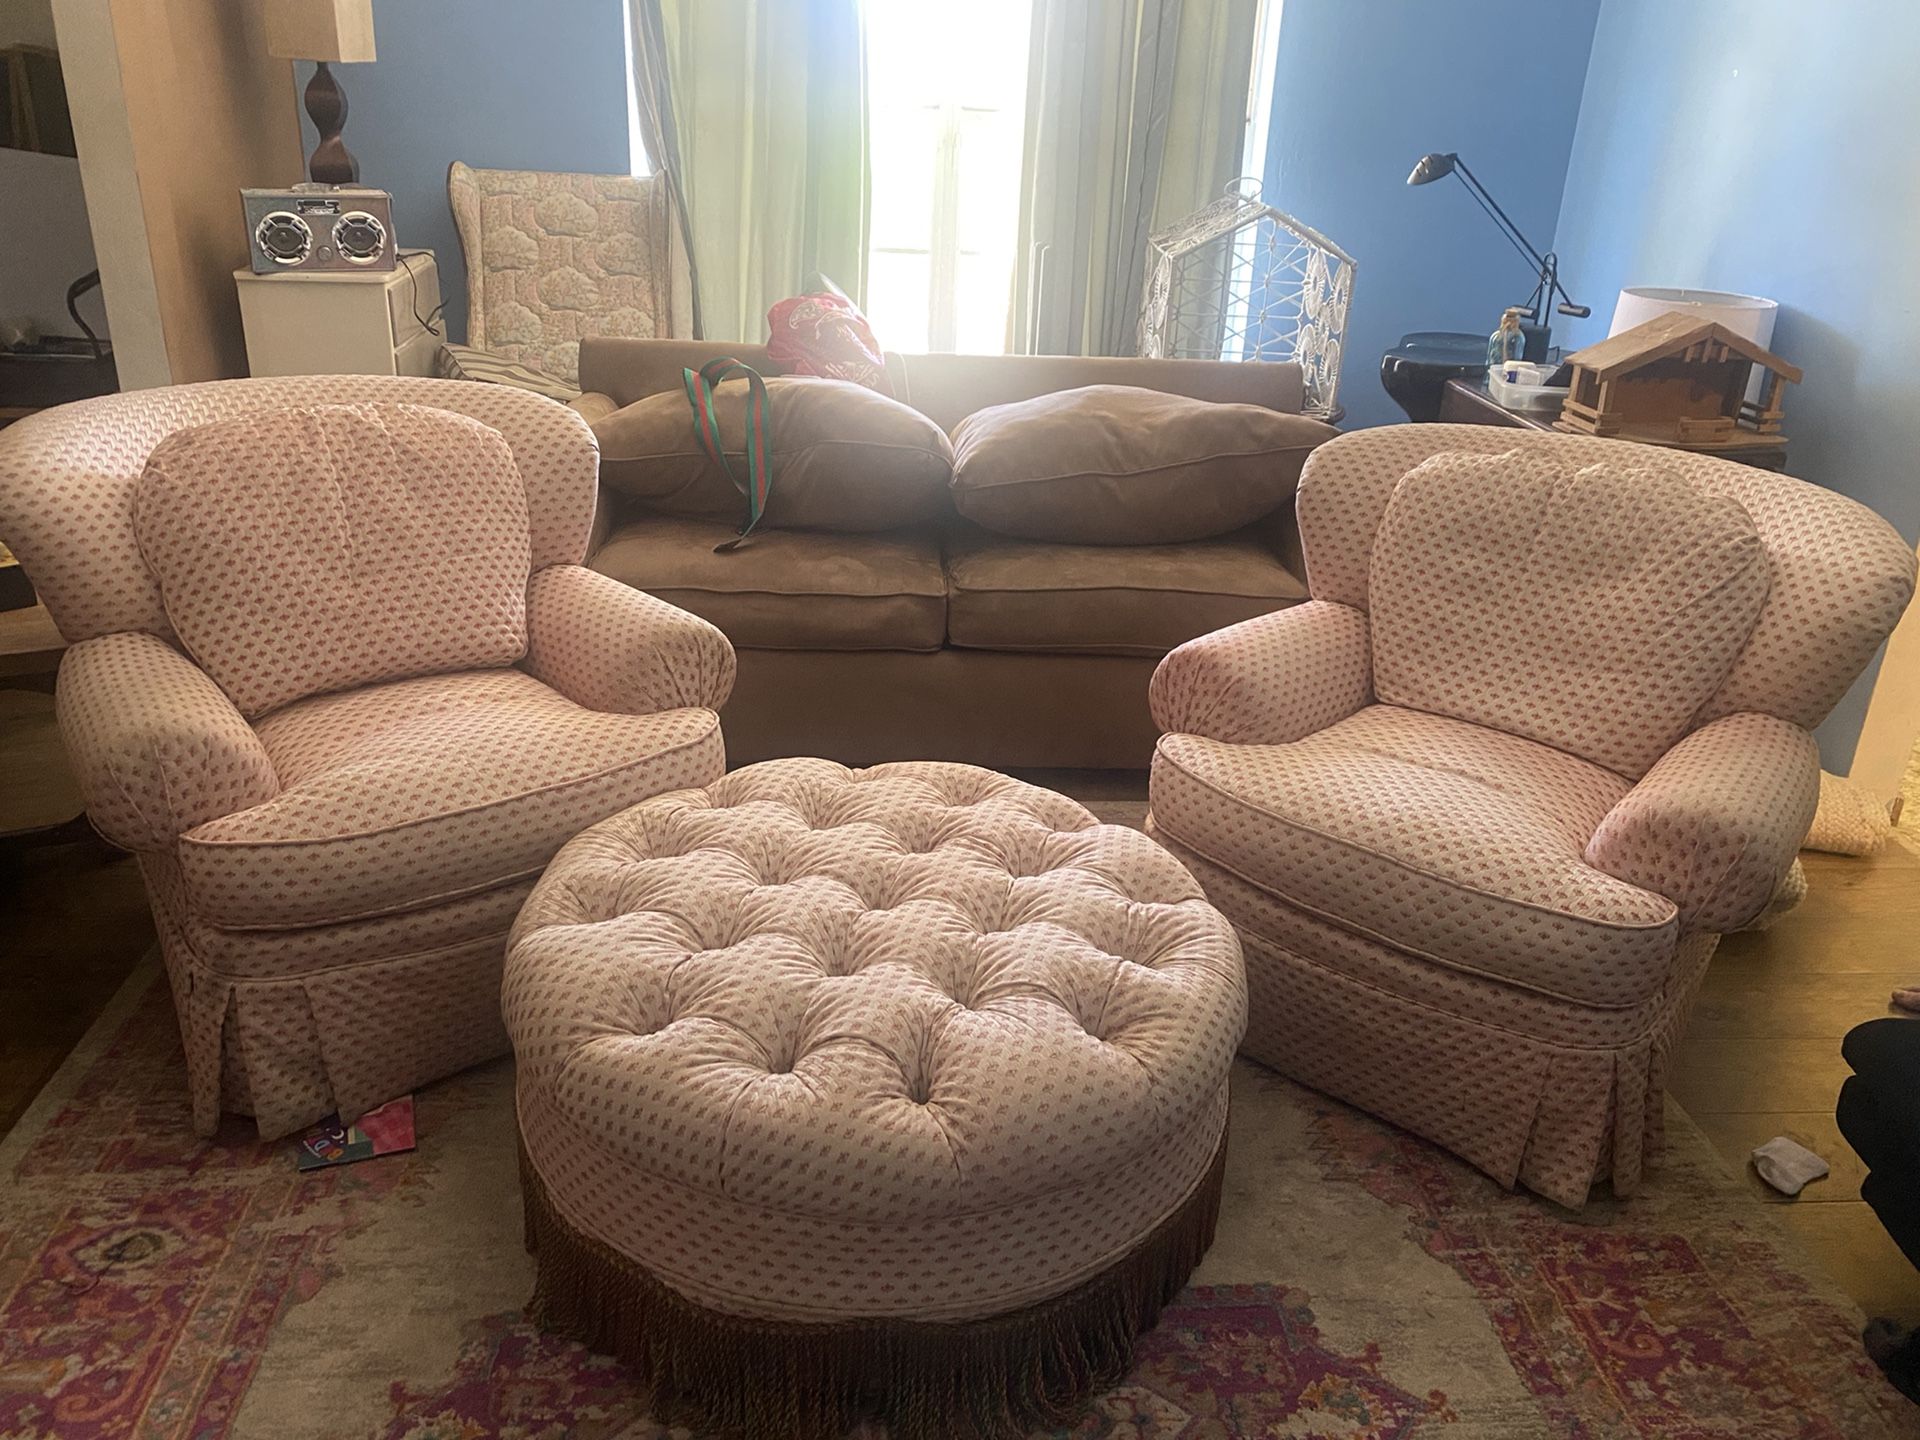 Vintage chairs and ottoman